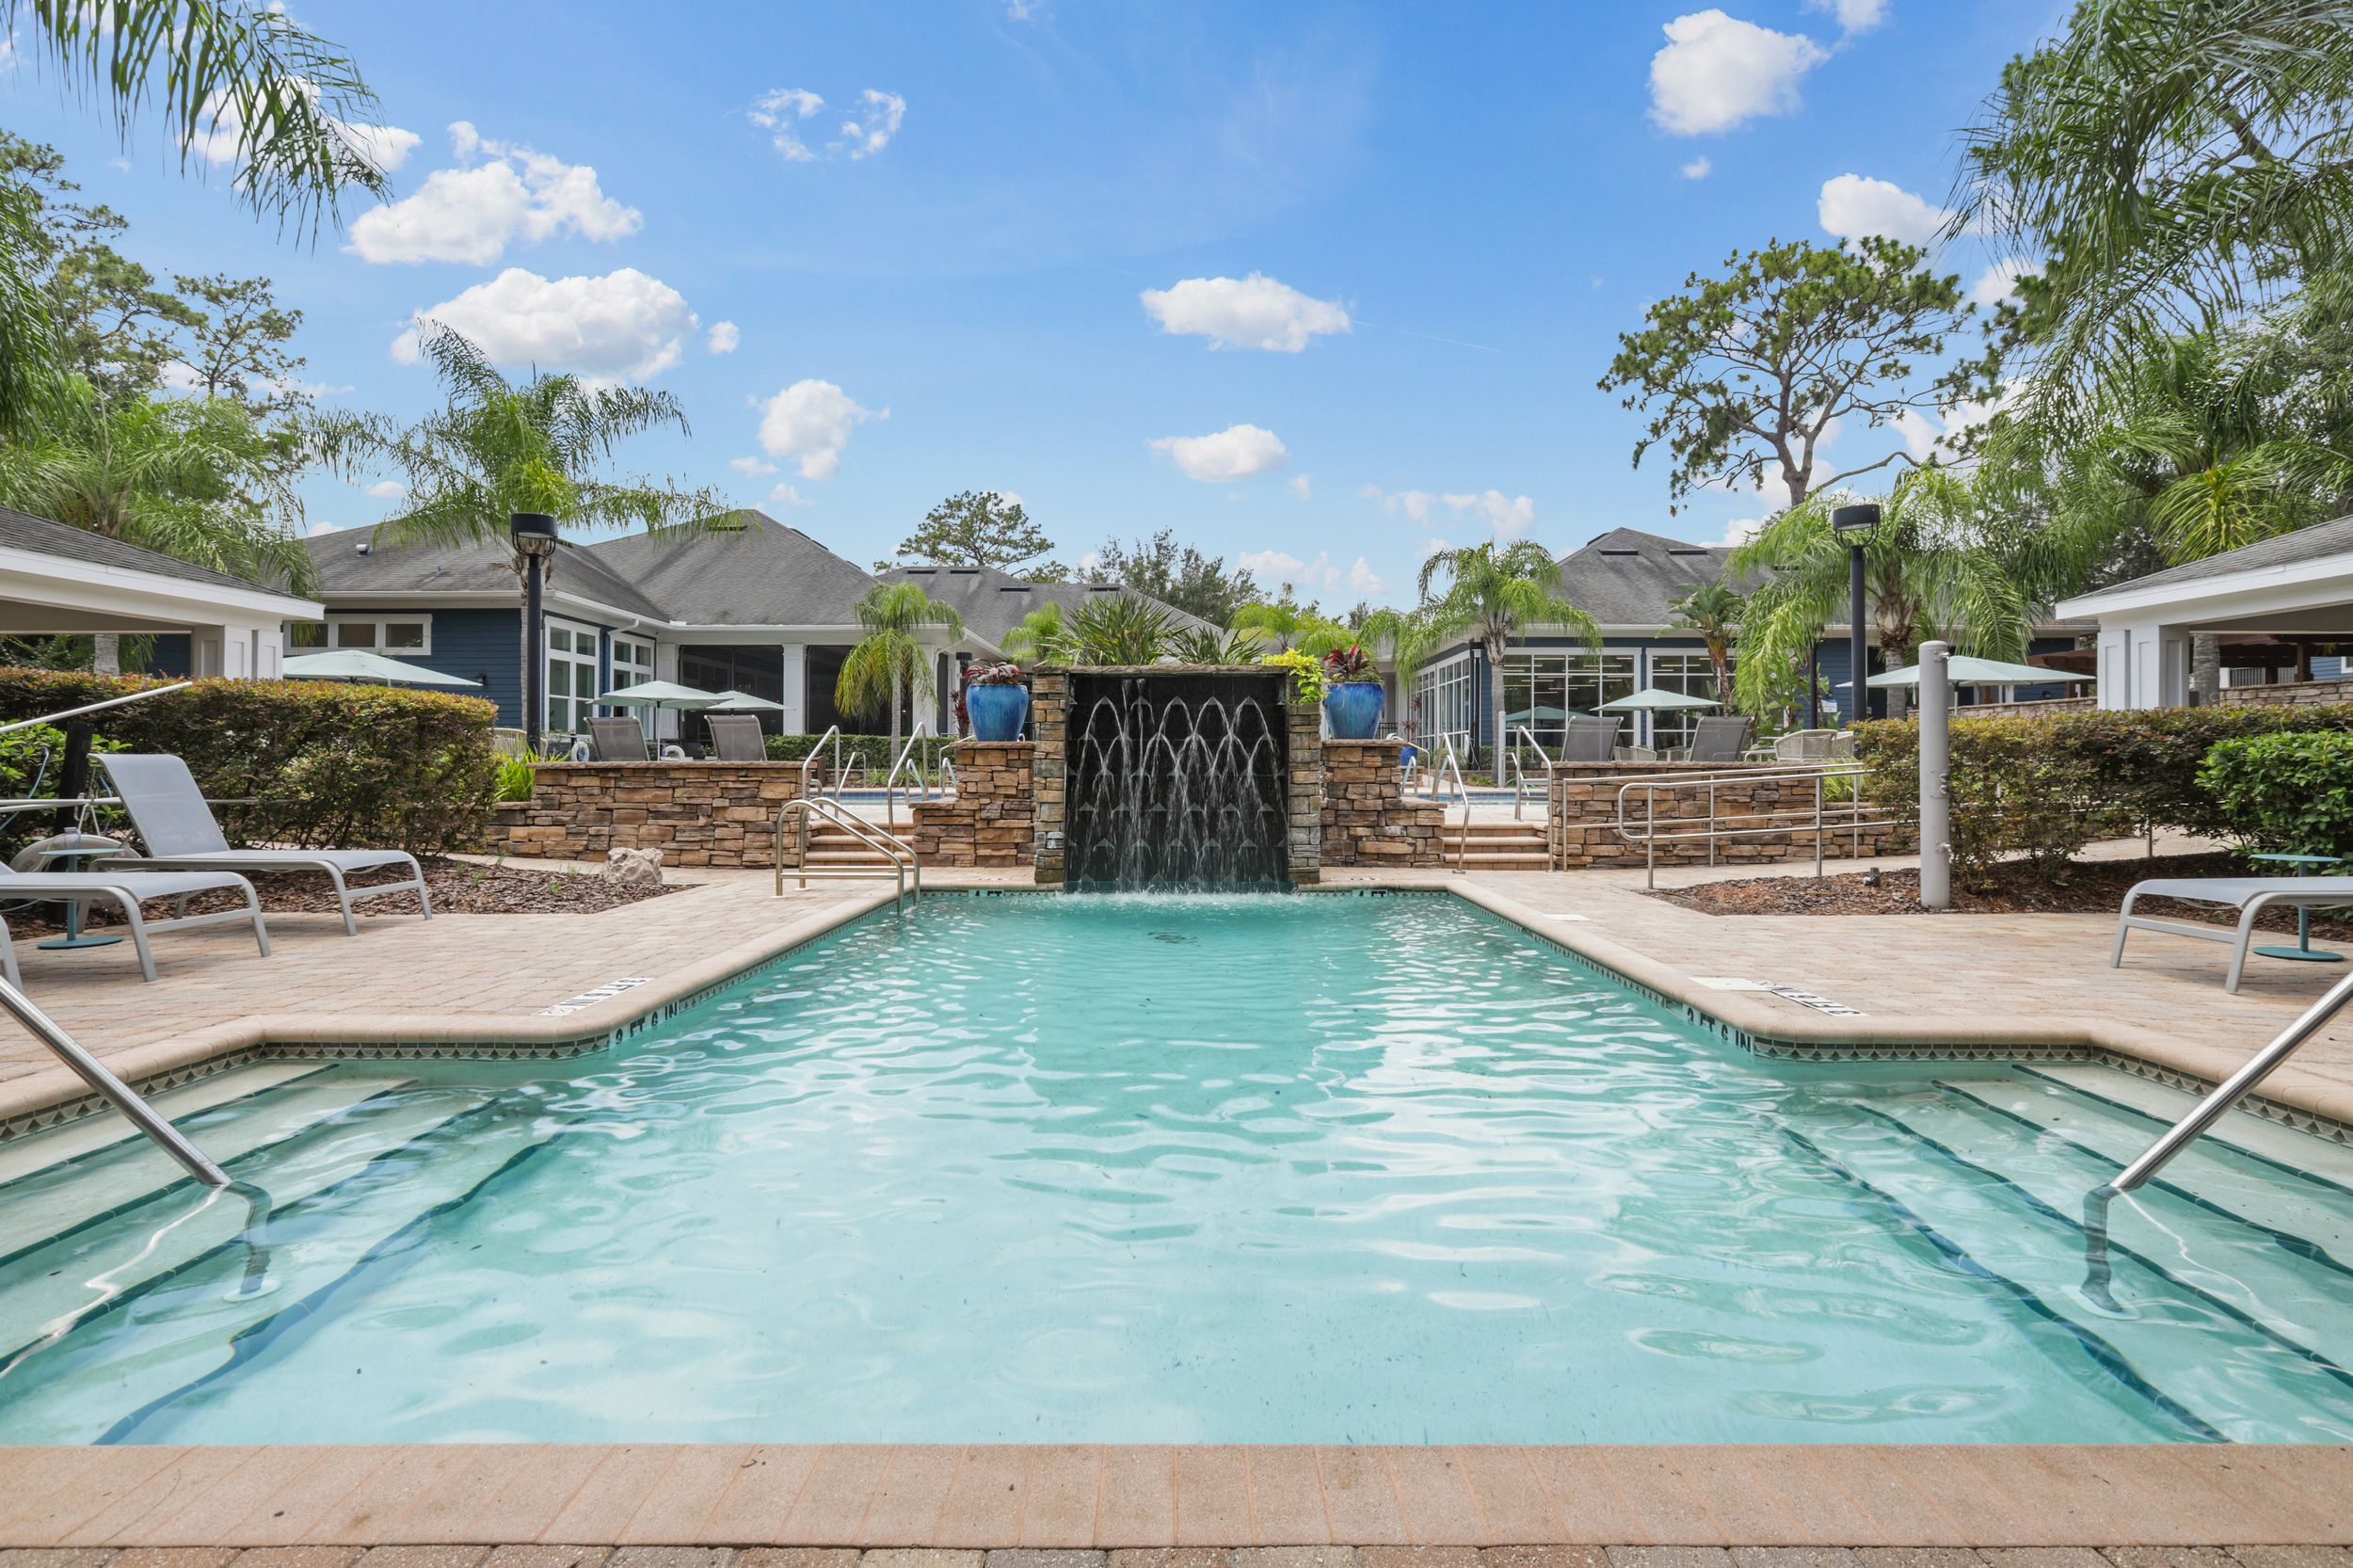 resort-style pool and hot tub with sundeck and lounge chairs